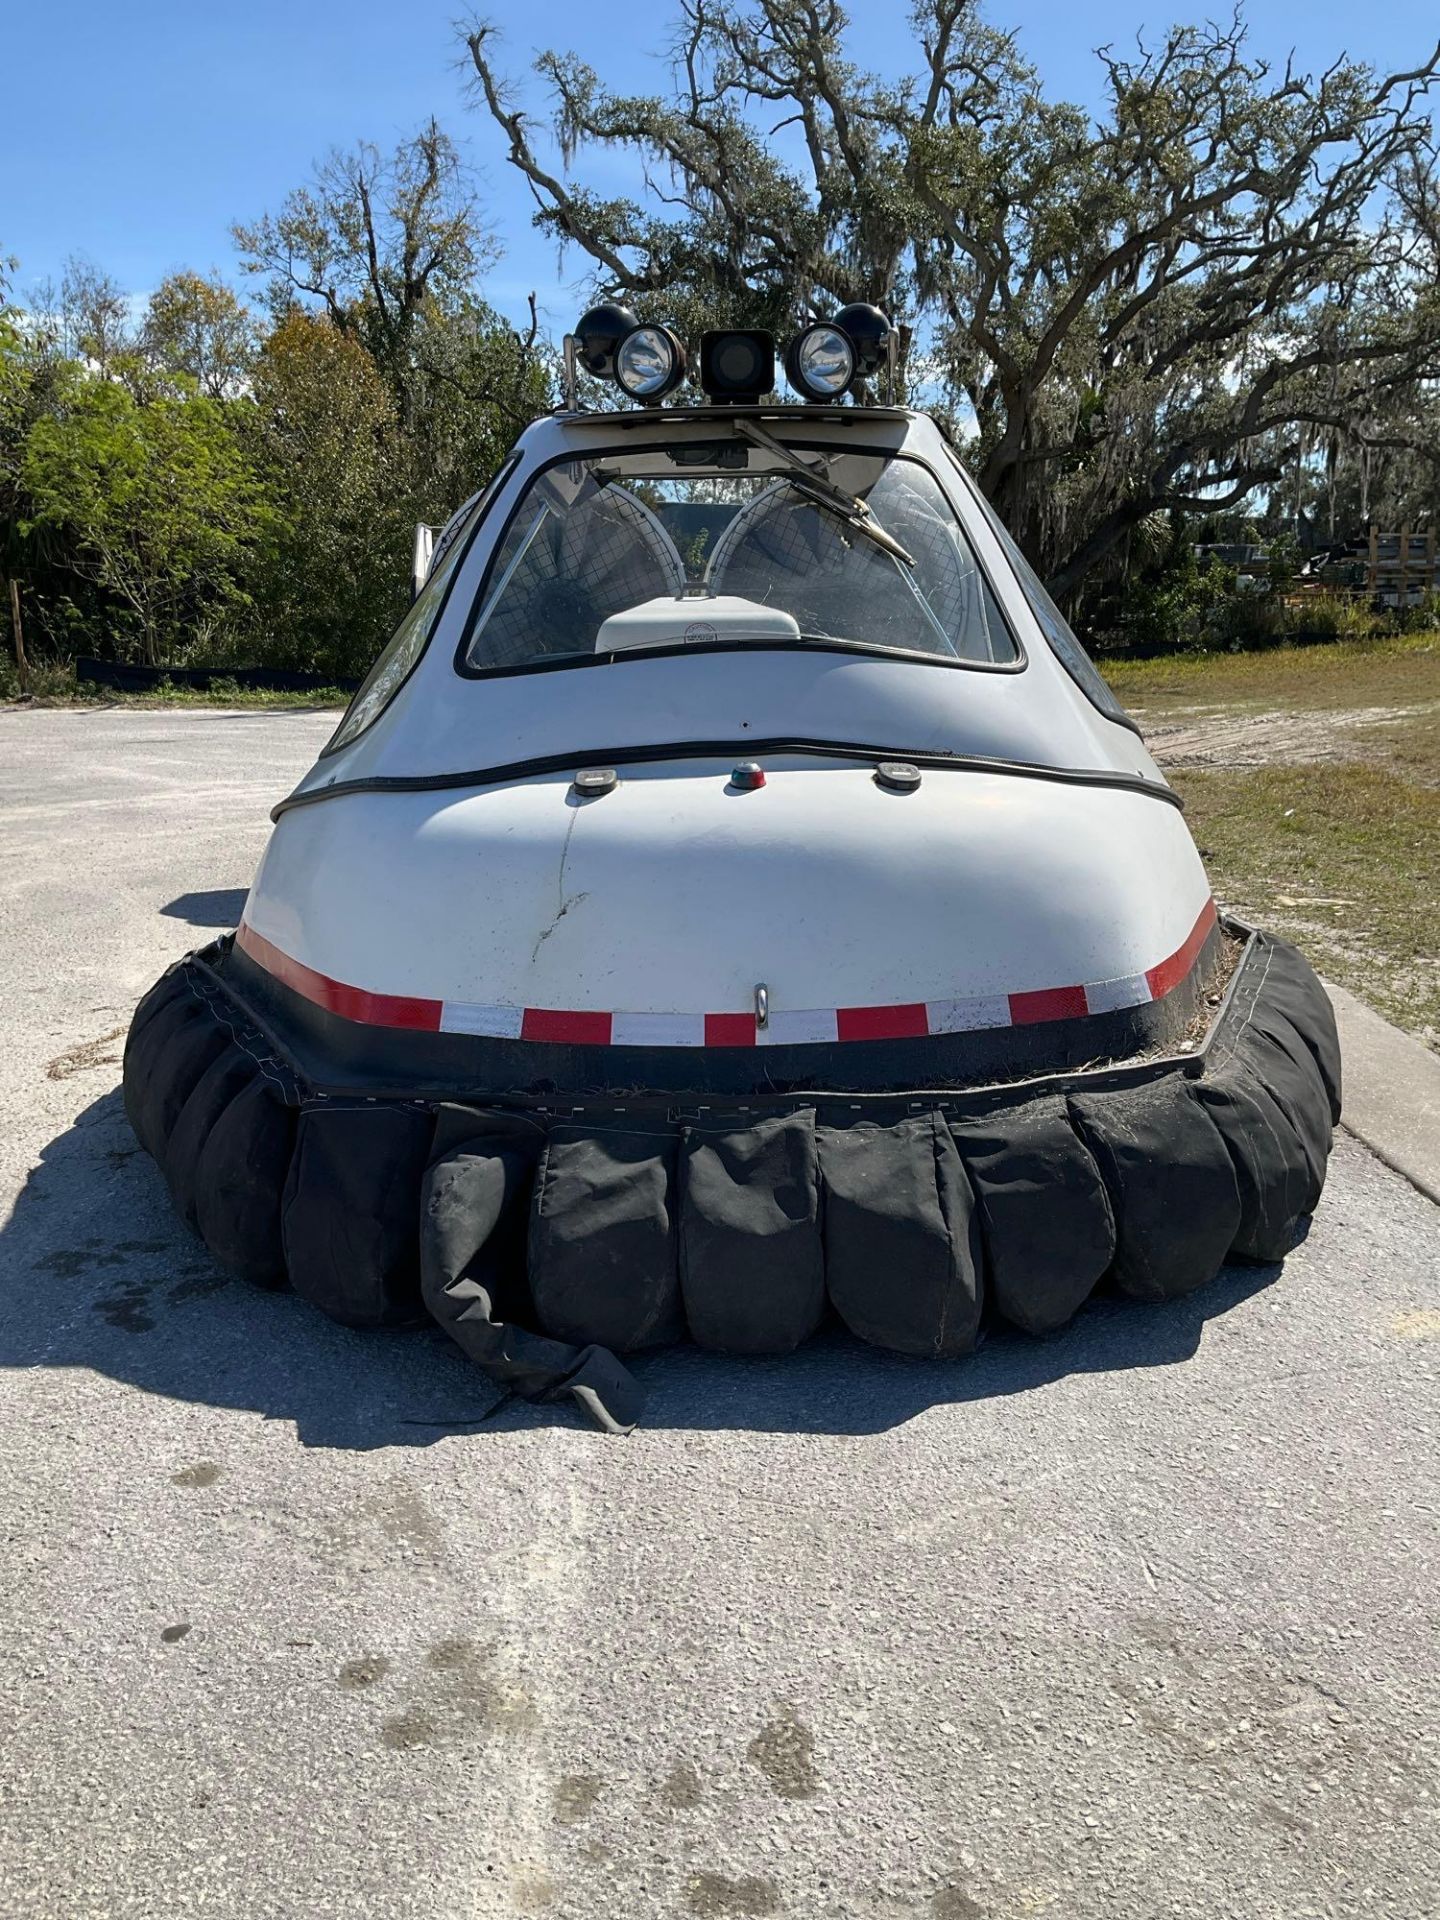 HOVERGUARD HOVERCRAFT W/TRAILER, HOVERTOUR 1000 MODEL 7900200, NEW BATTERY , 37 HRS SHOWING - Image 10 of 39